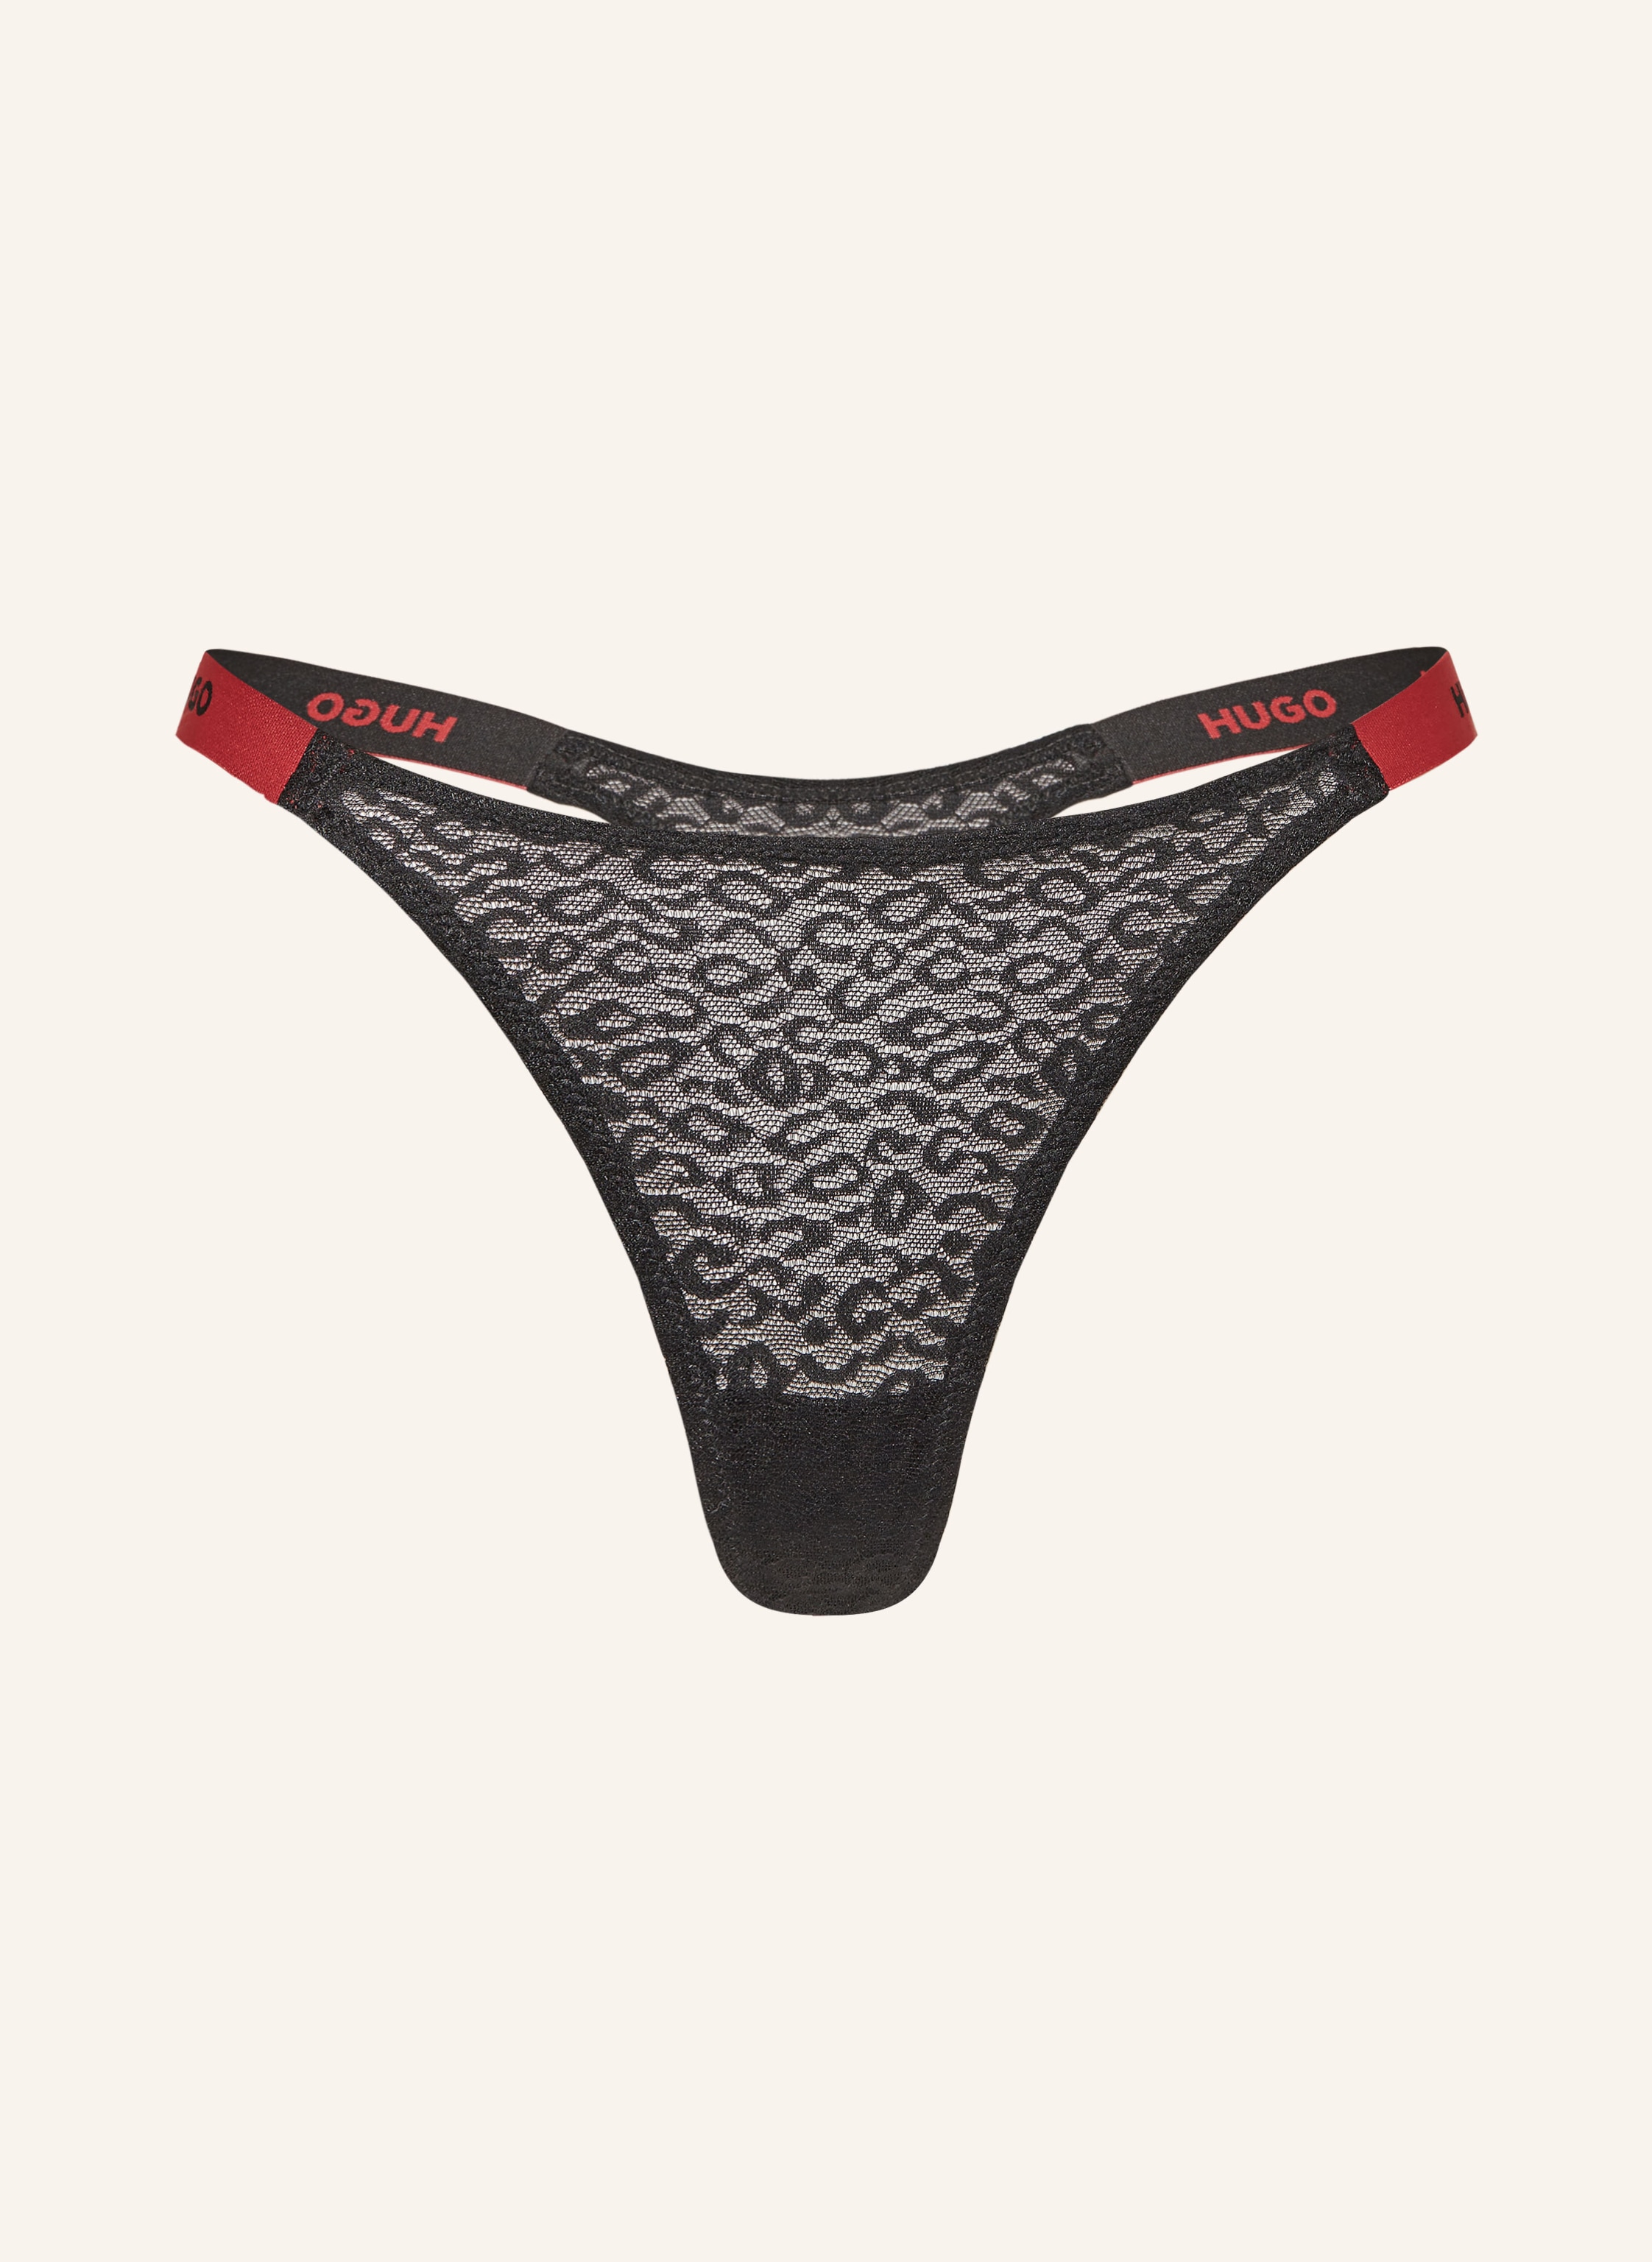 SPORTY HUGO in LACE Thong black/ red